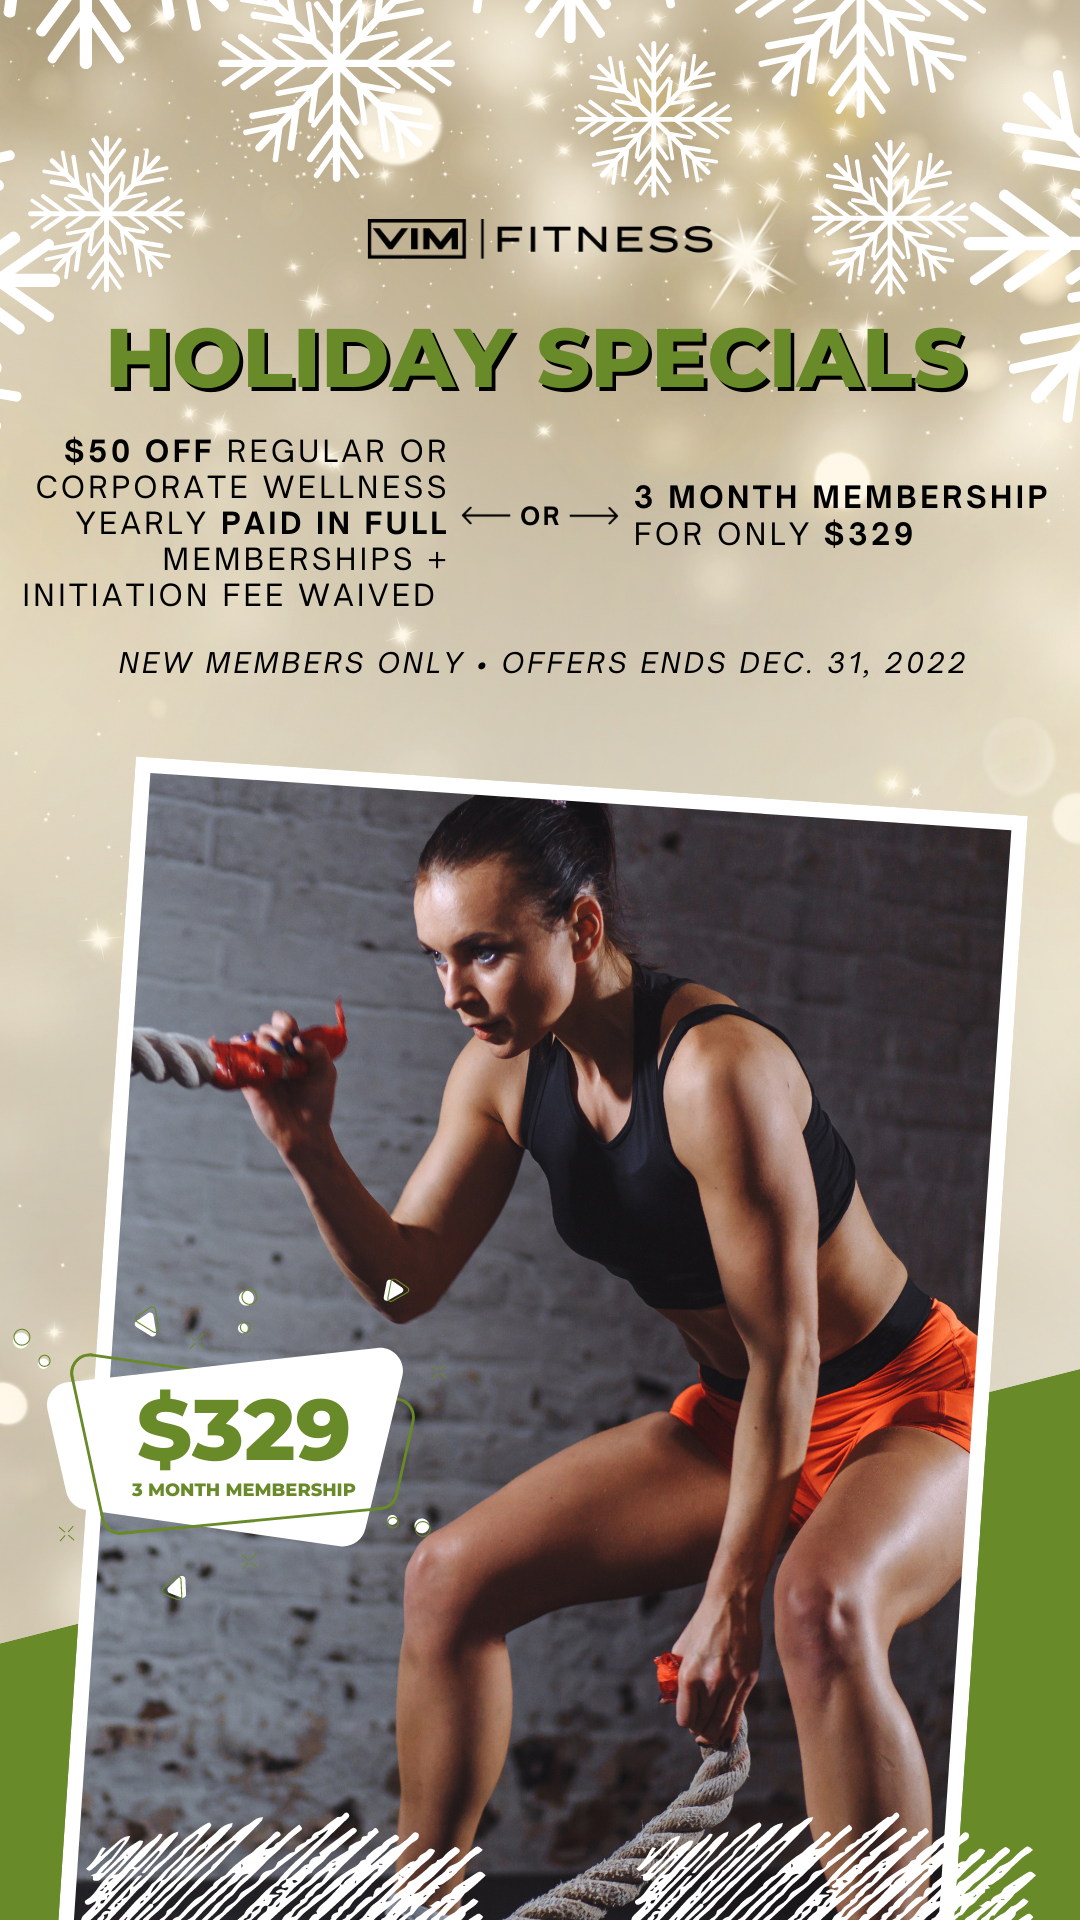 Holiday Membership Specials & 3 Month Membership for $329